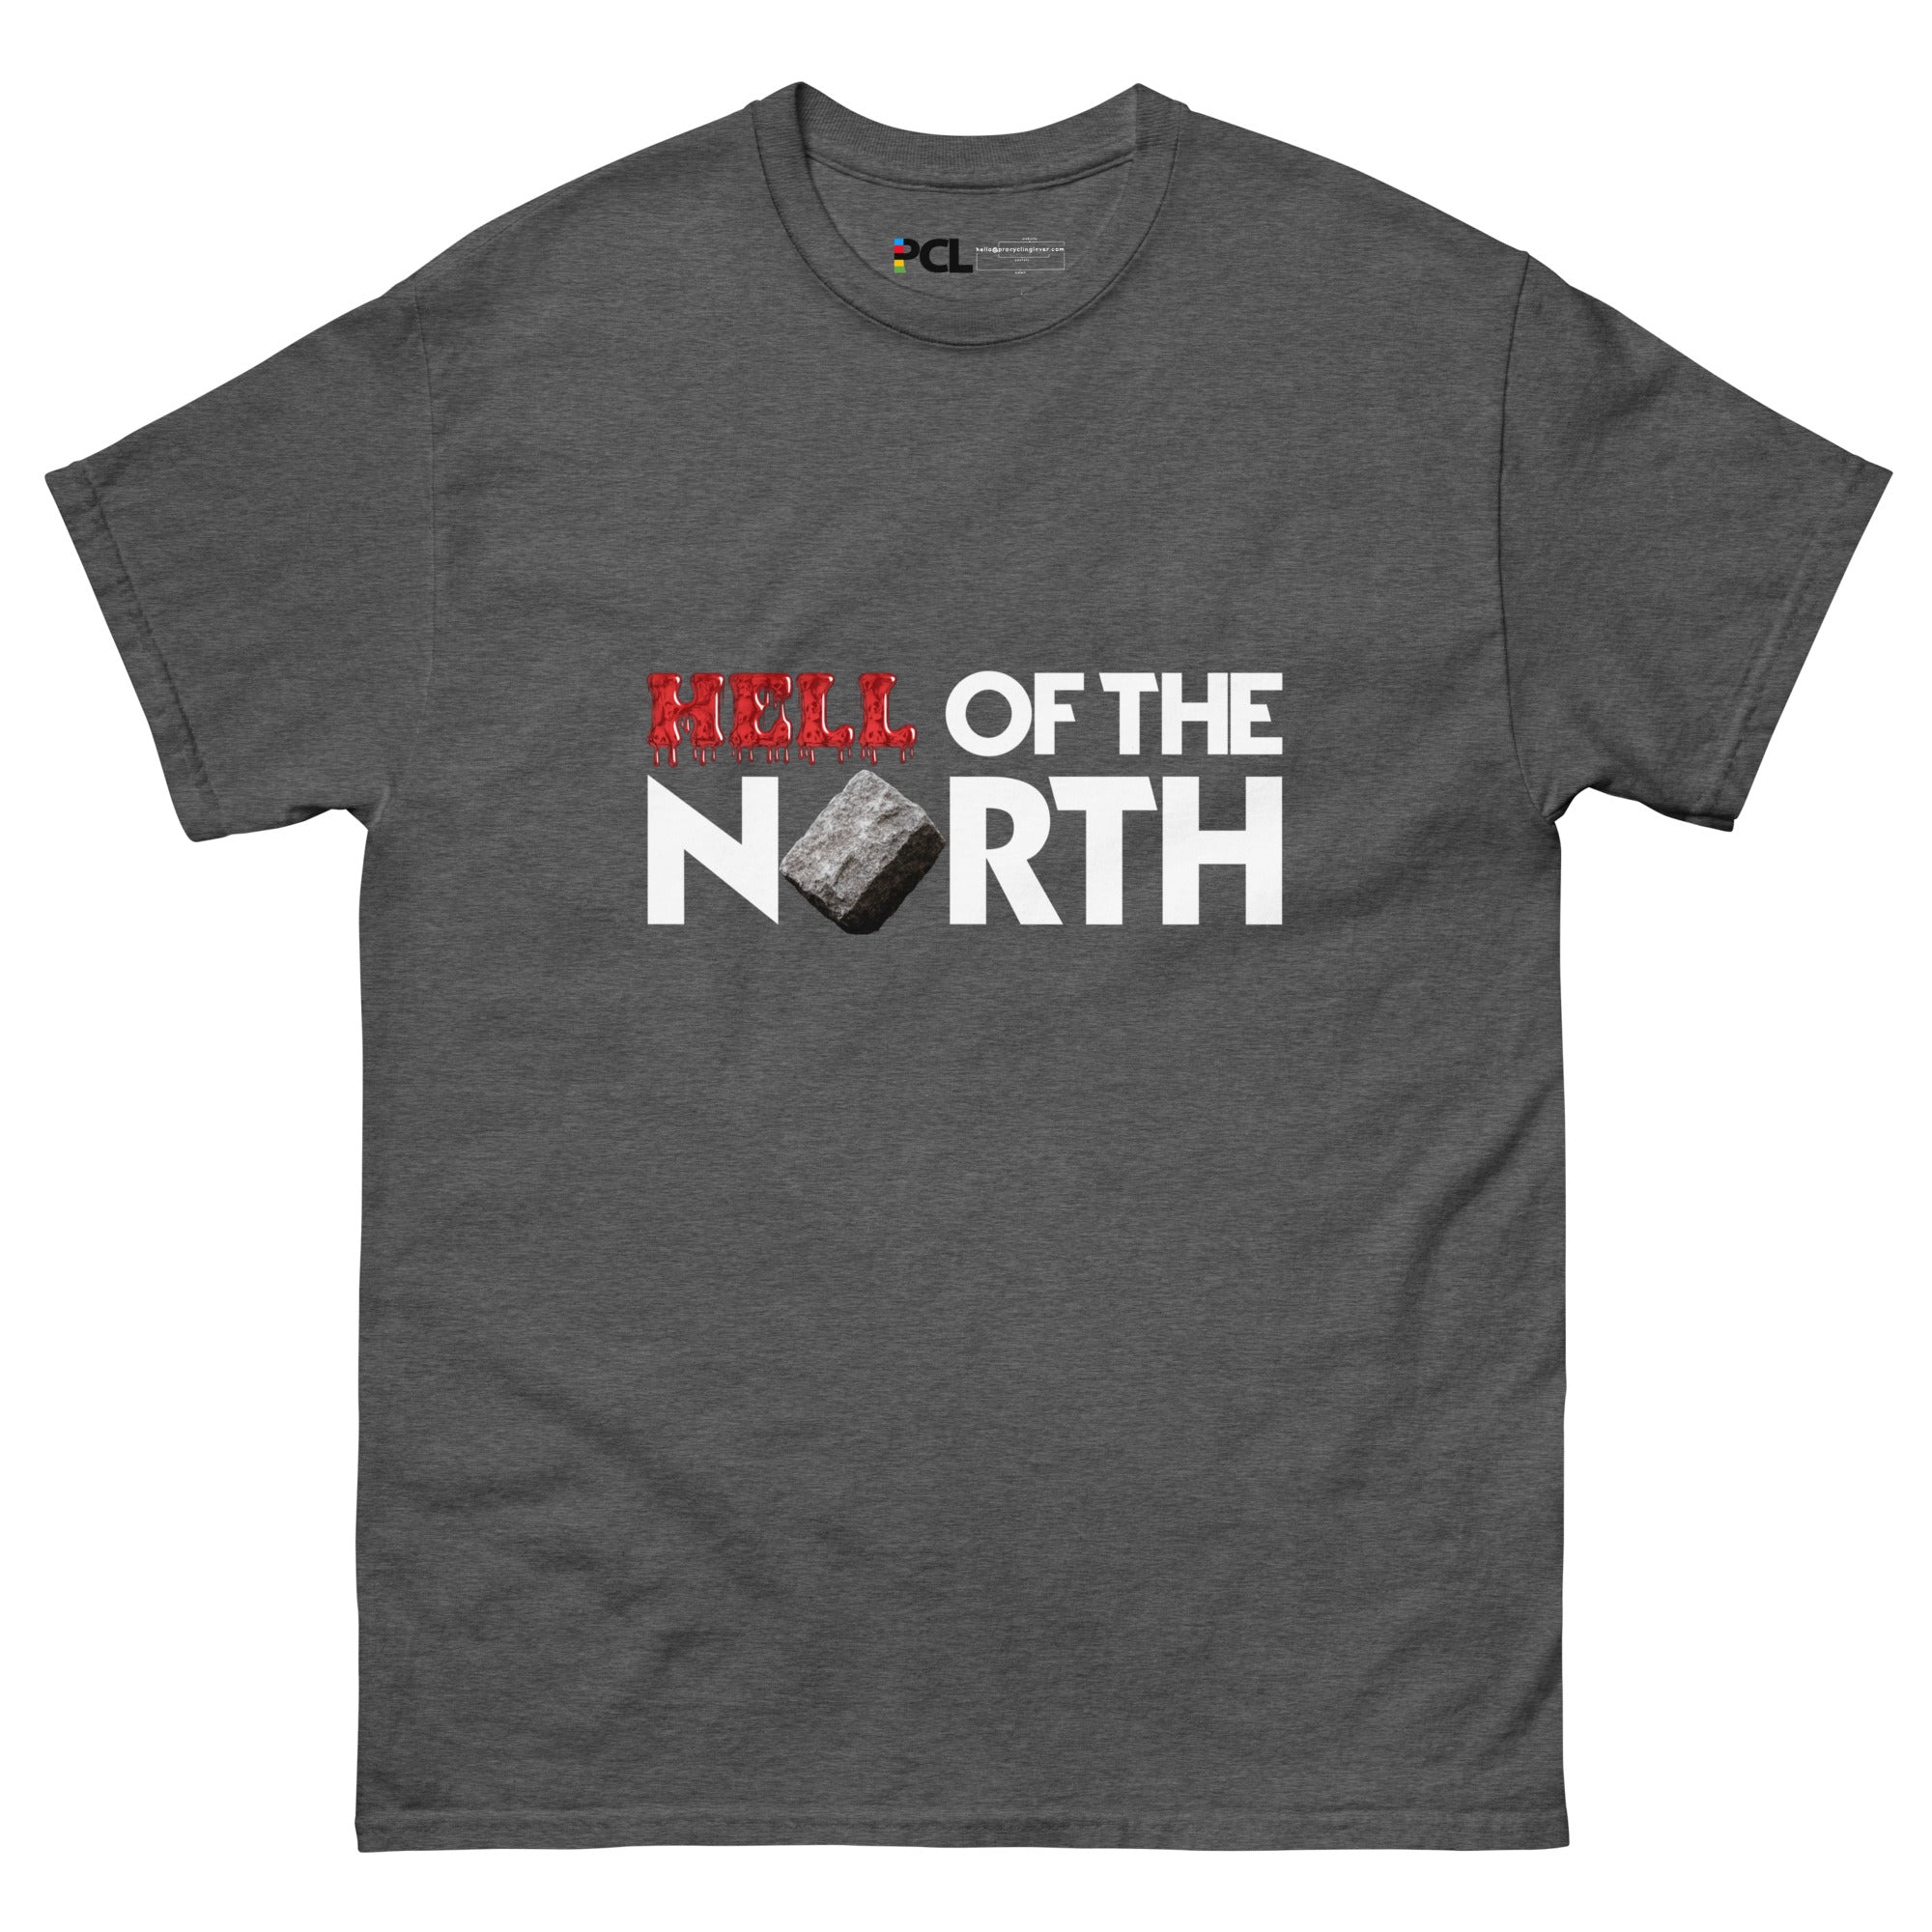 HELL OF THE NORTH Unisex T-Shirt